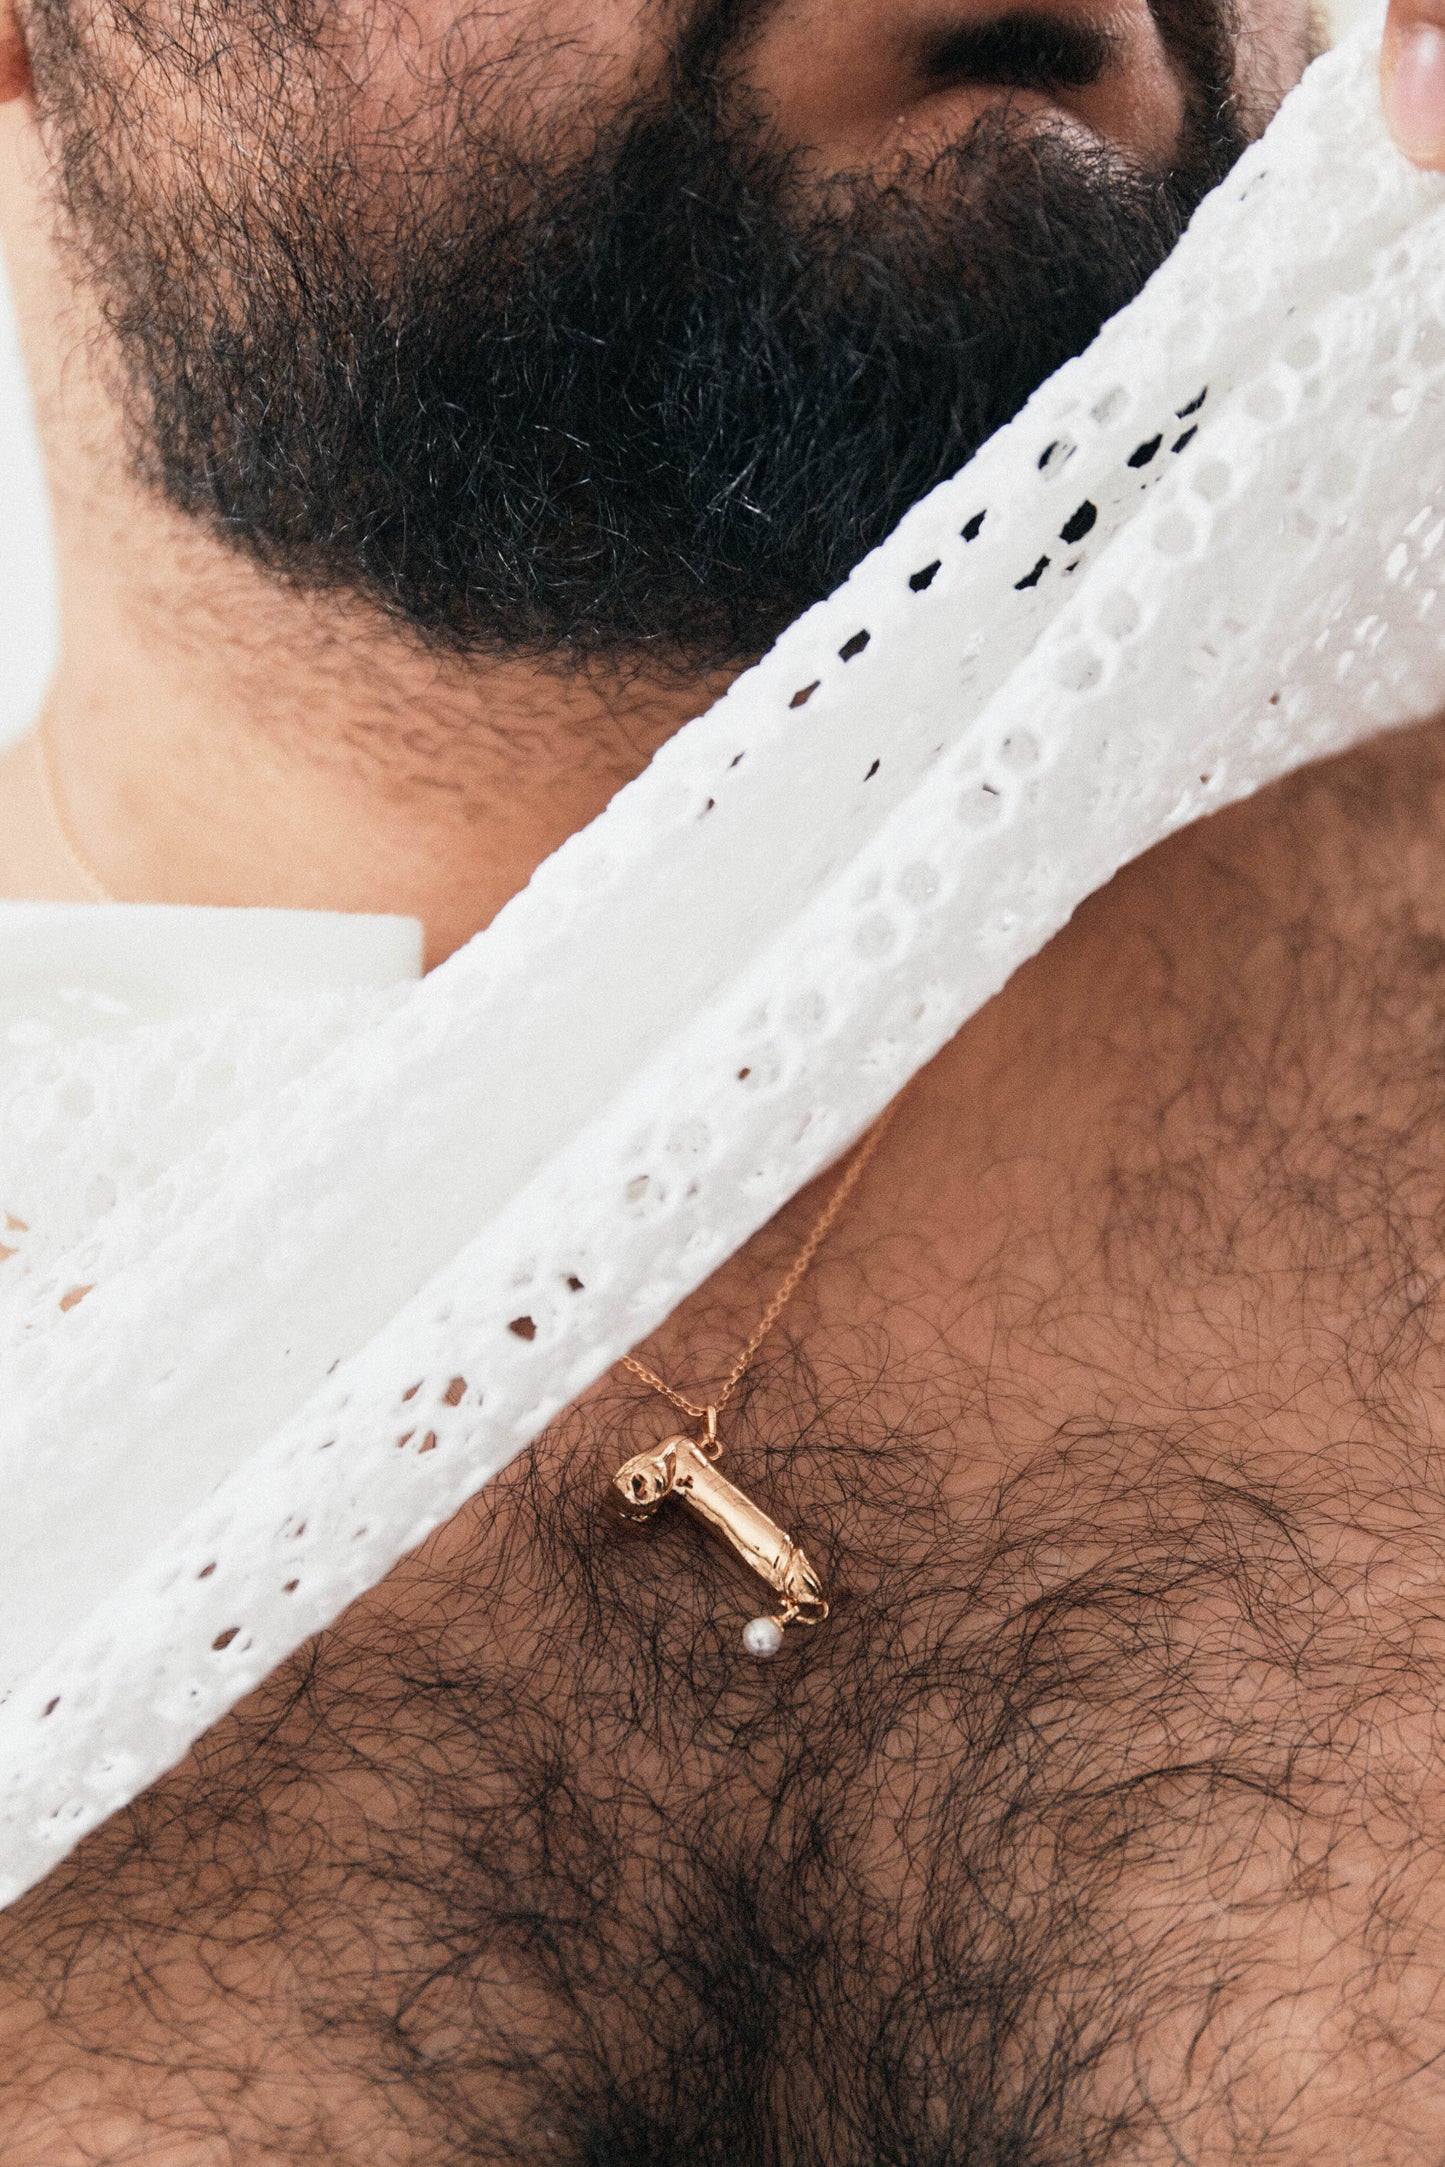 PEARL DRIP DICK GOLD PENDANT NECKLACE